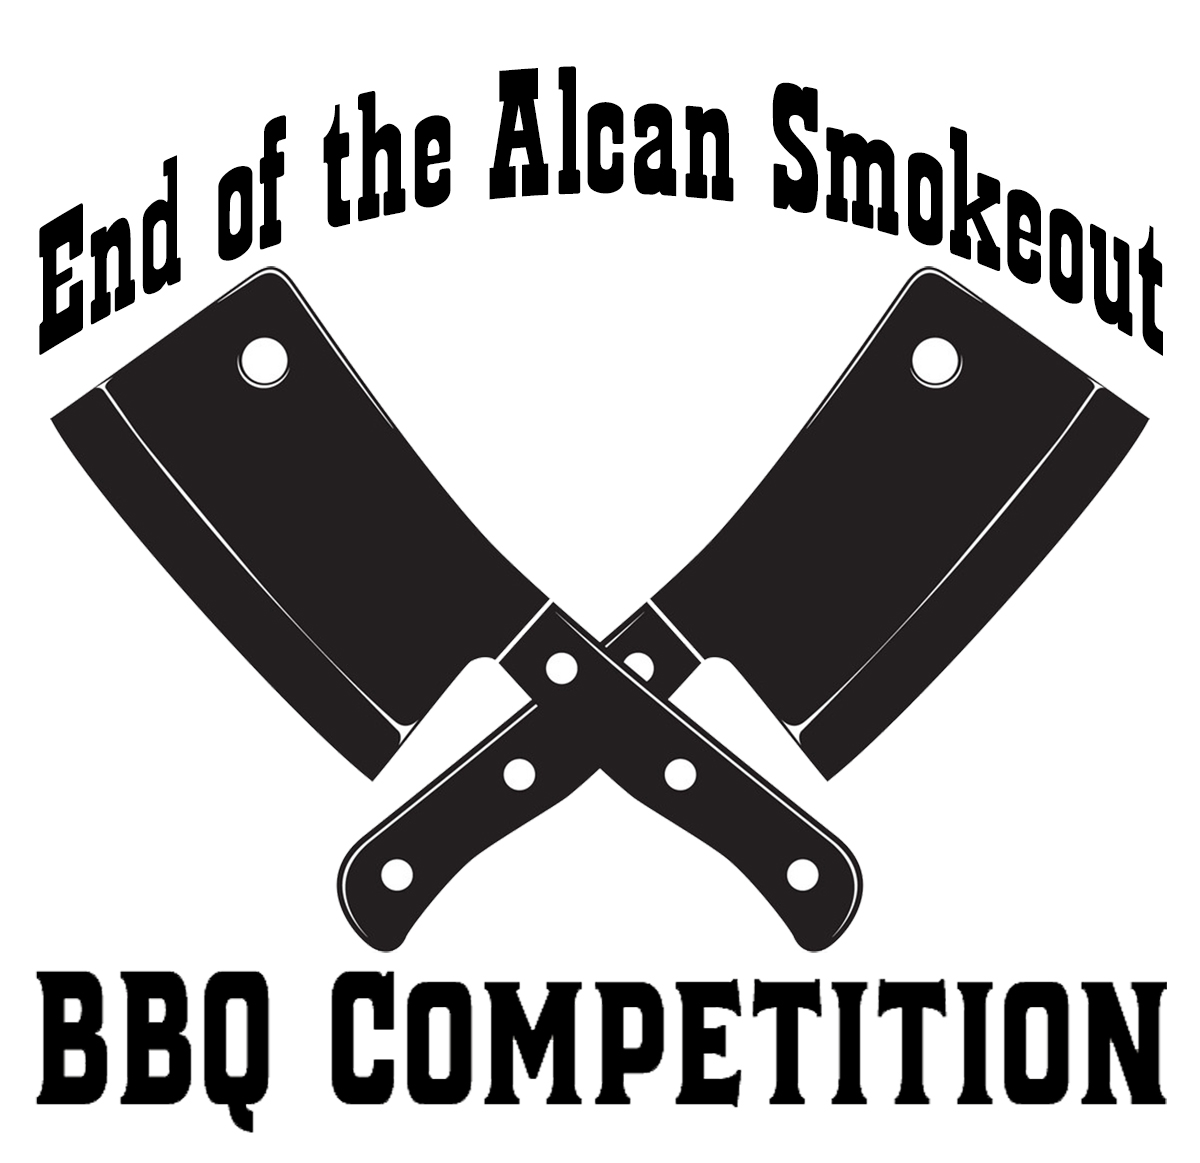 End Of the Alcan Smokeout BBQ Competition